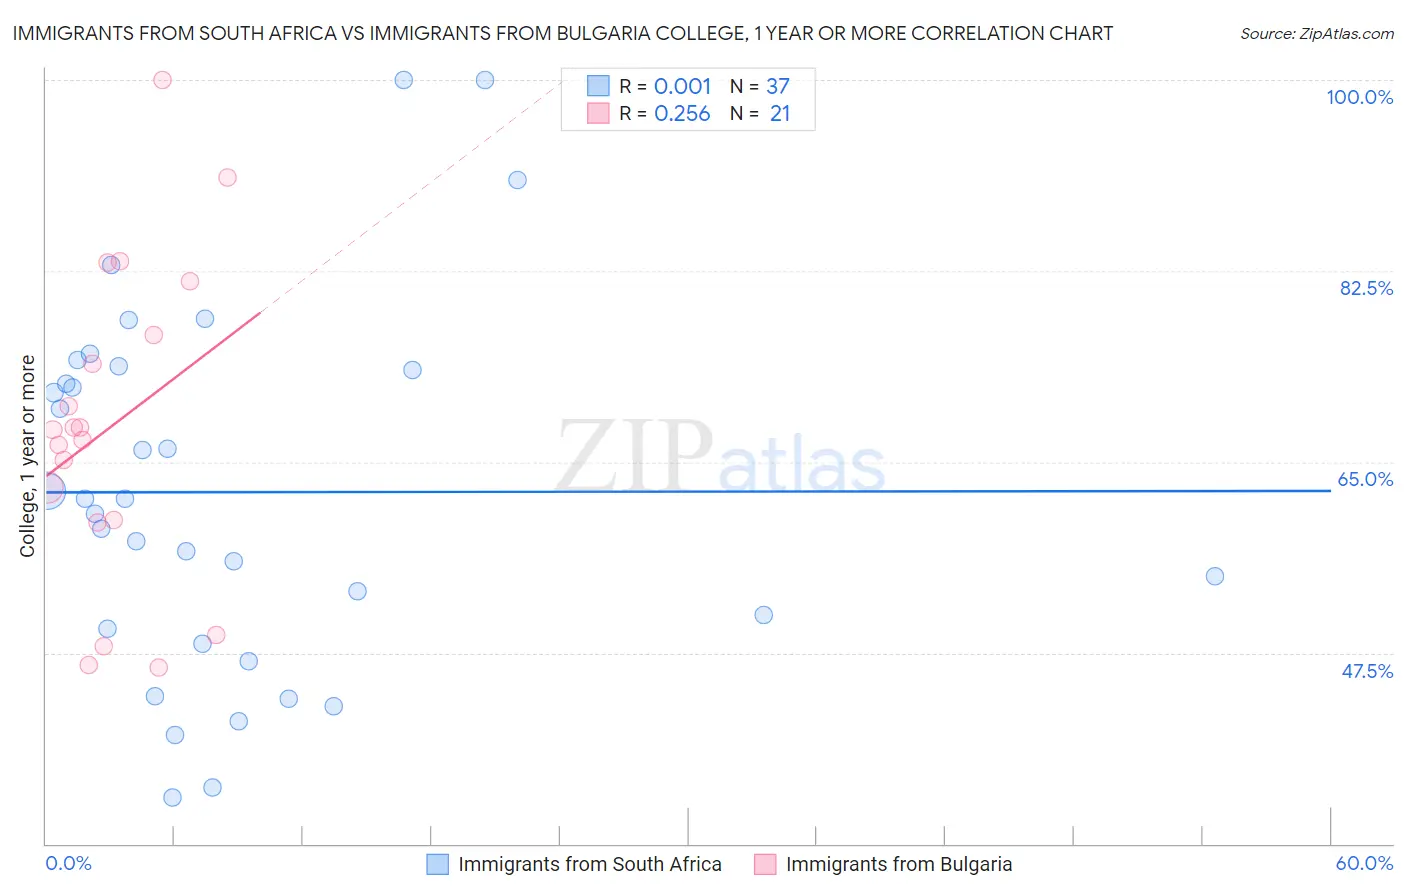 Immigrants from South Africa vs Immigrants from Bulgaria College, 1 year or more